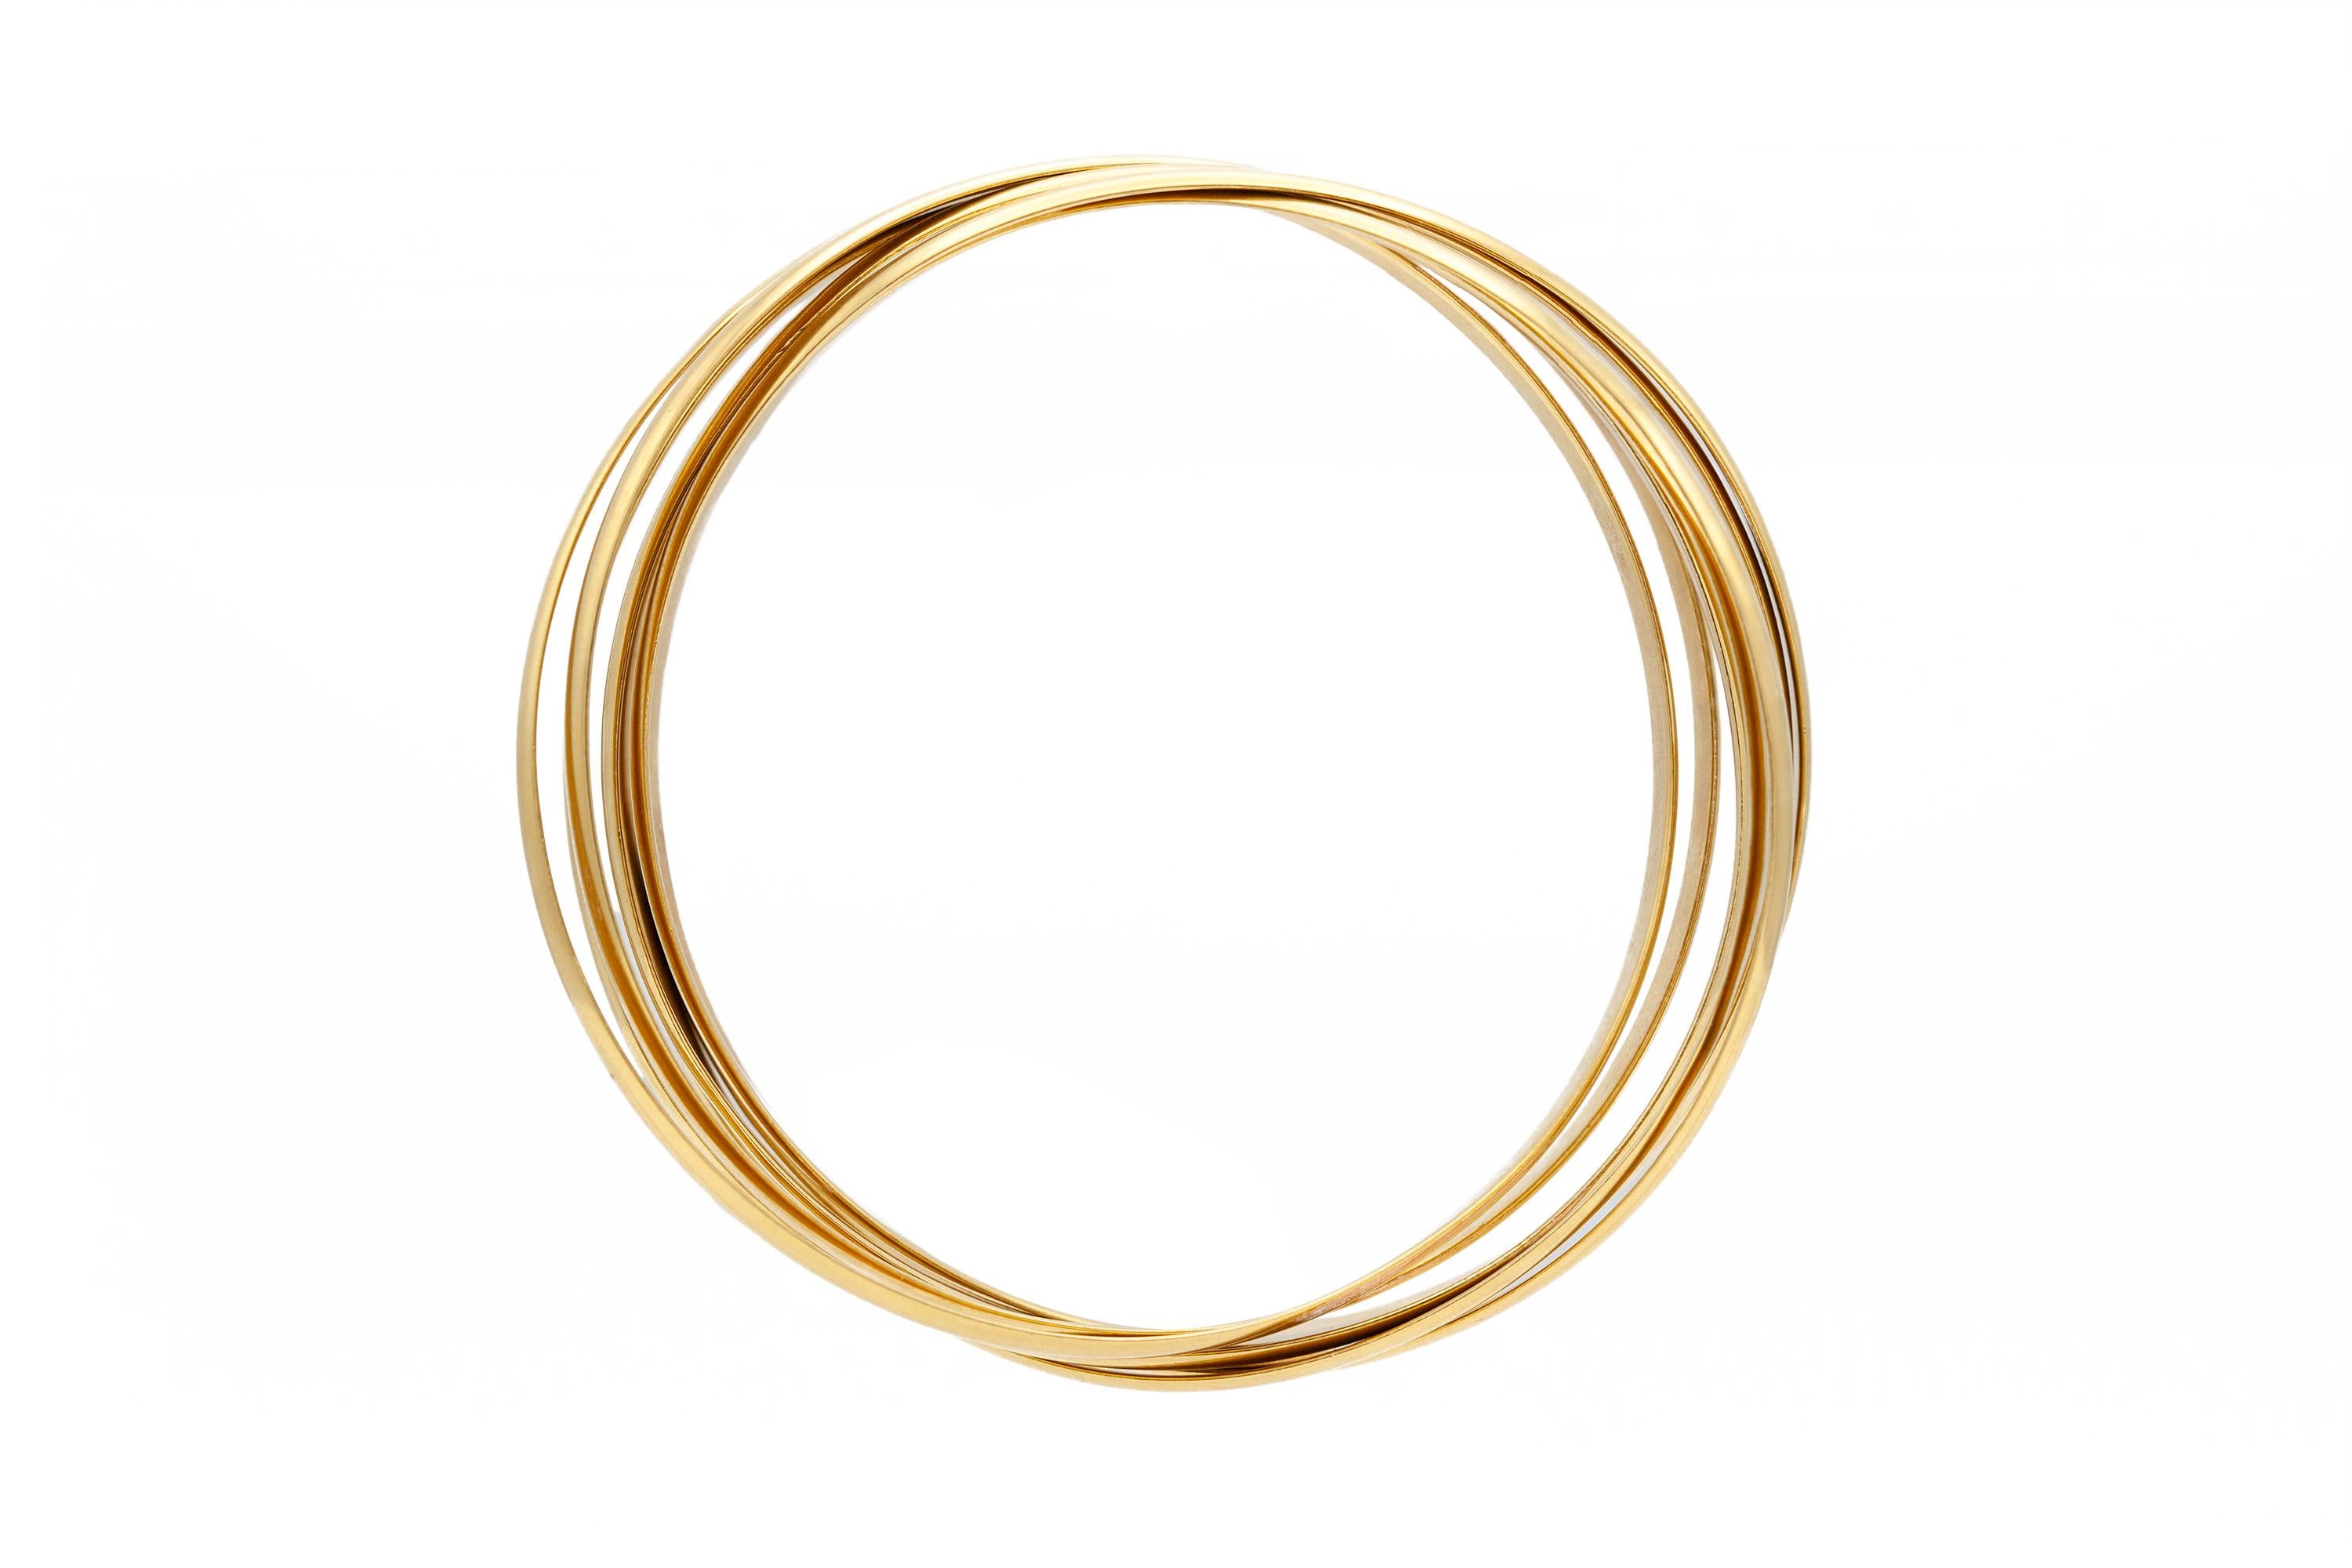 Finely crafted in 18k yellow gold.
7 rolling Bangles
Signed by Tiffany & Co. and Paloma Picasso.
Size 8 inches
Each bangle is 4mm wide.